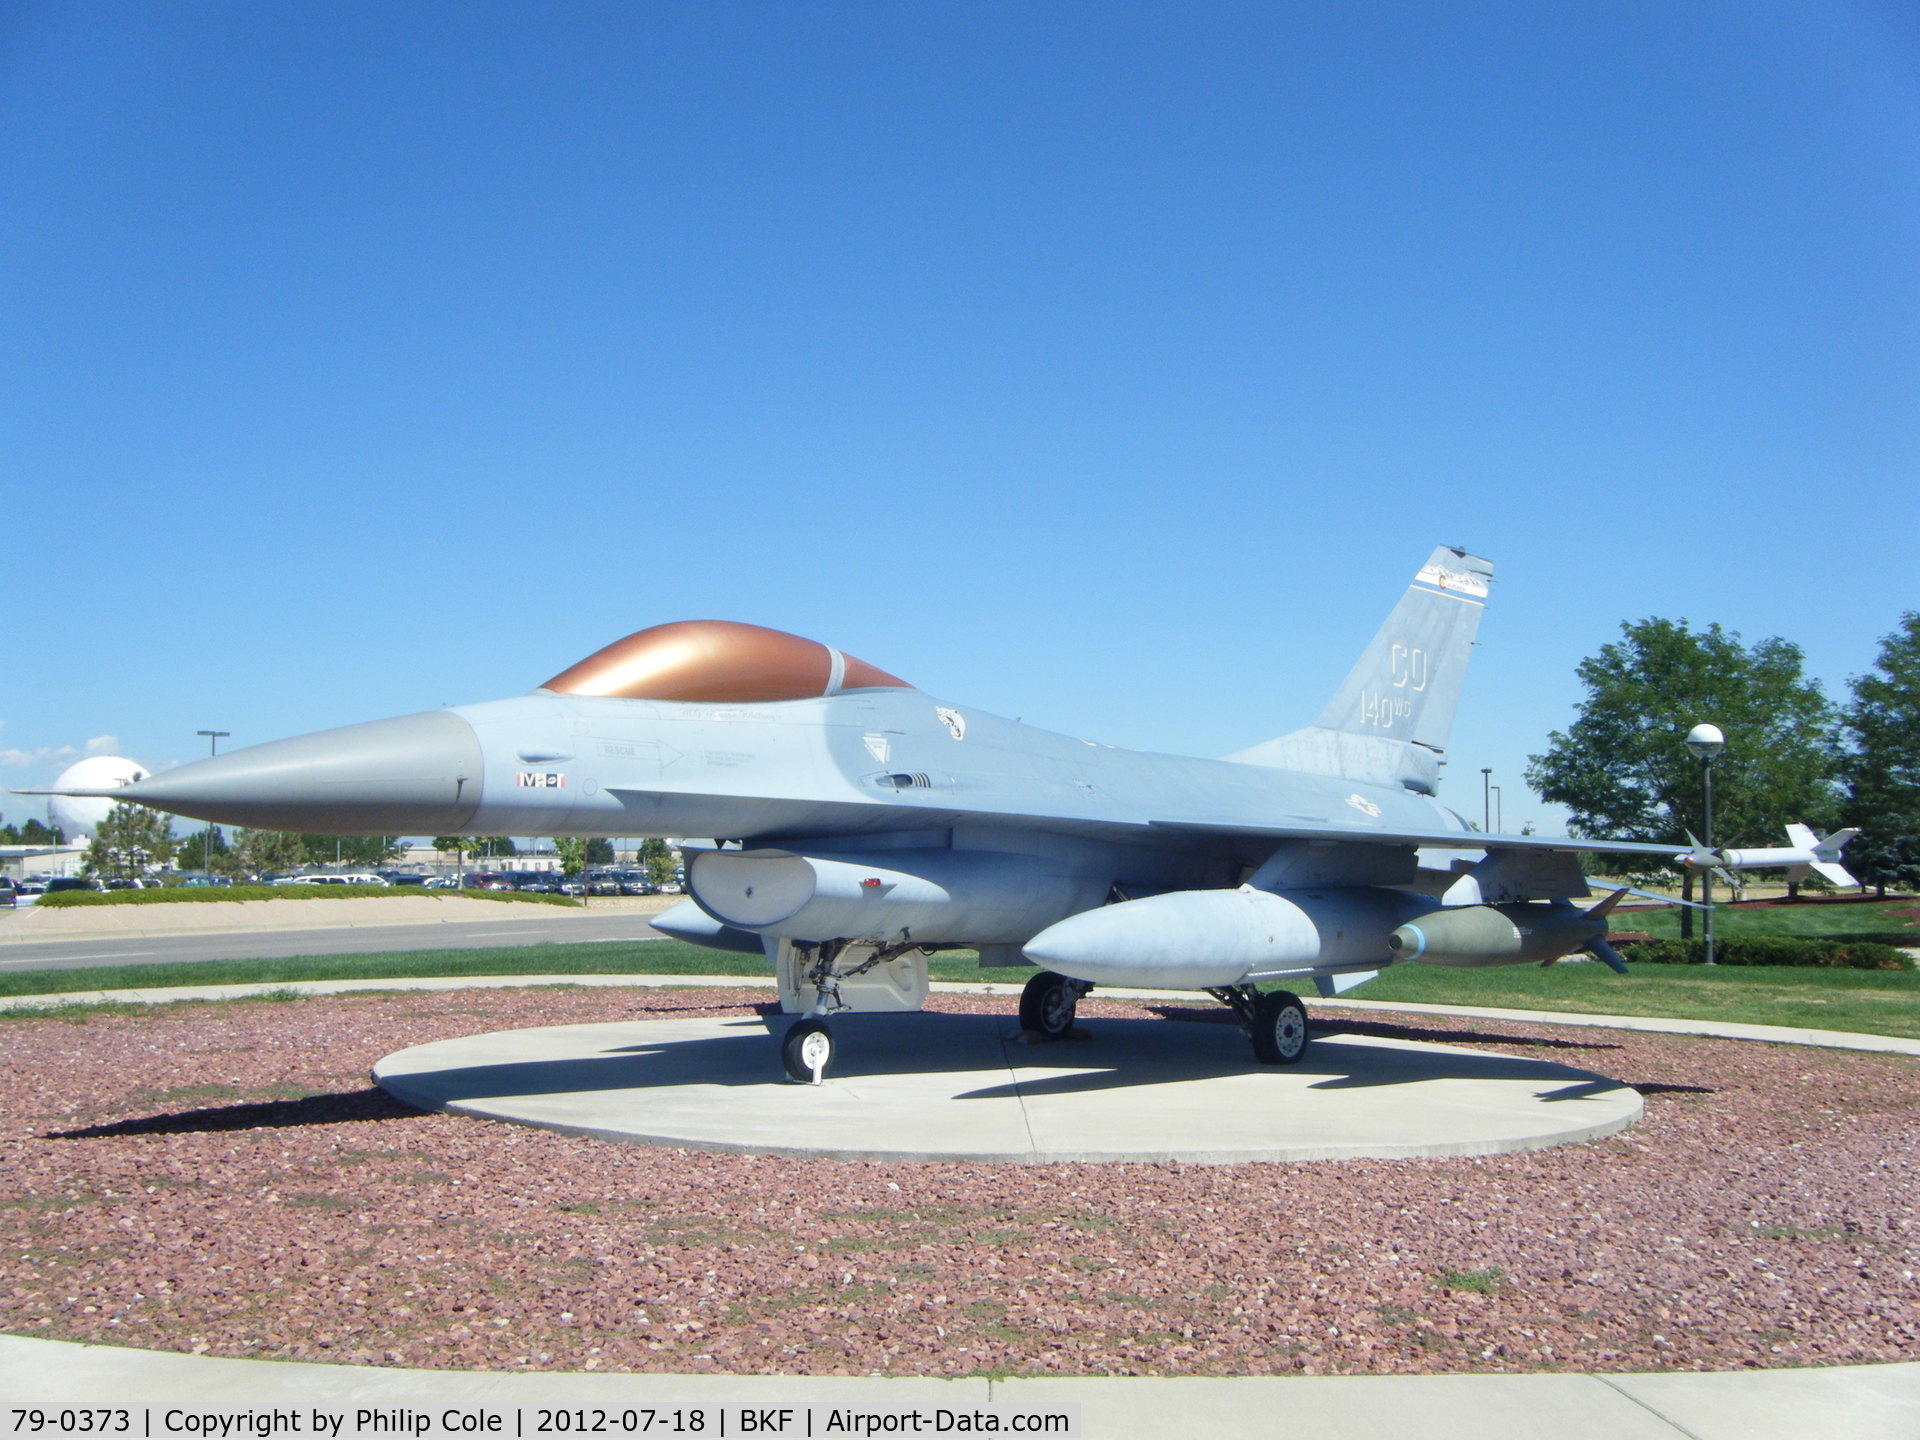 79-0373, 1979 General Dynamics F-16A Fighting Falcon C/N 61-158, Preserved outside 140 WG HQ Building